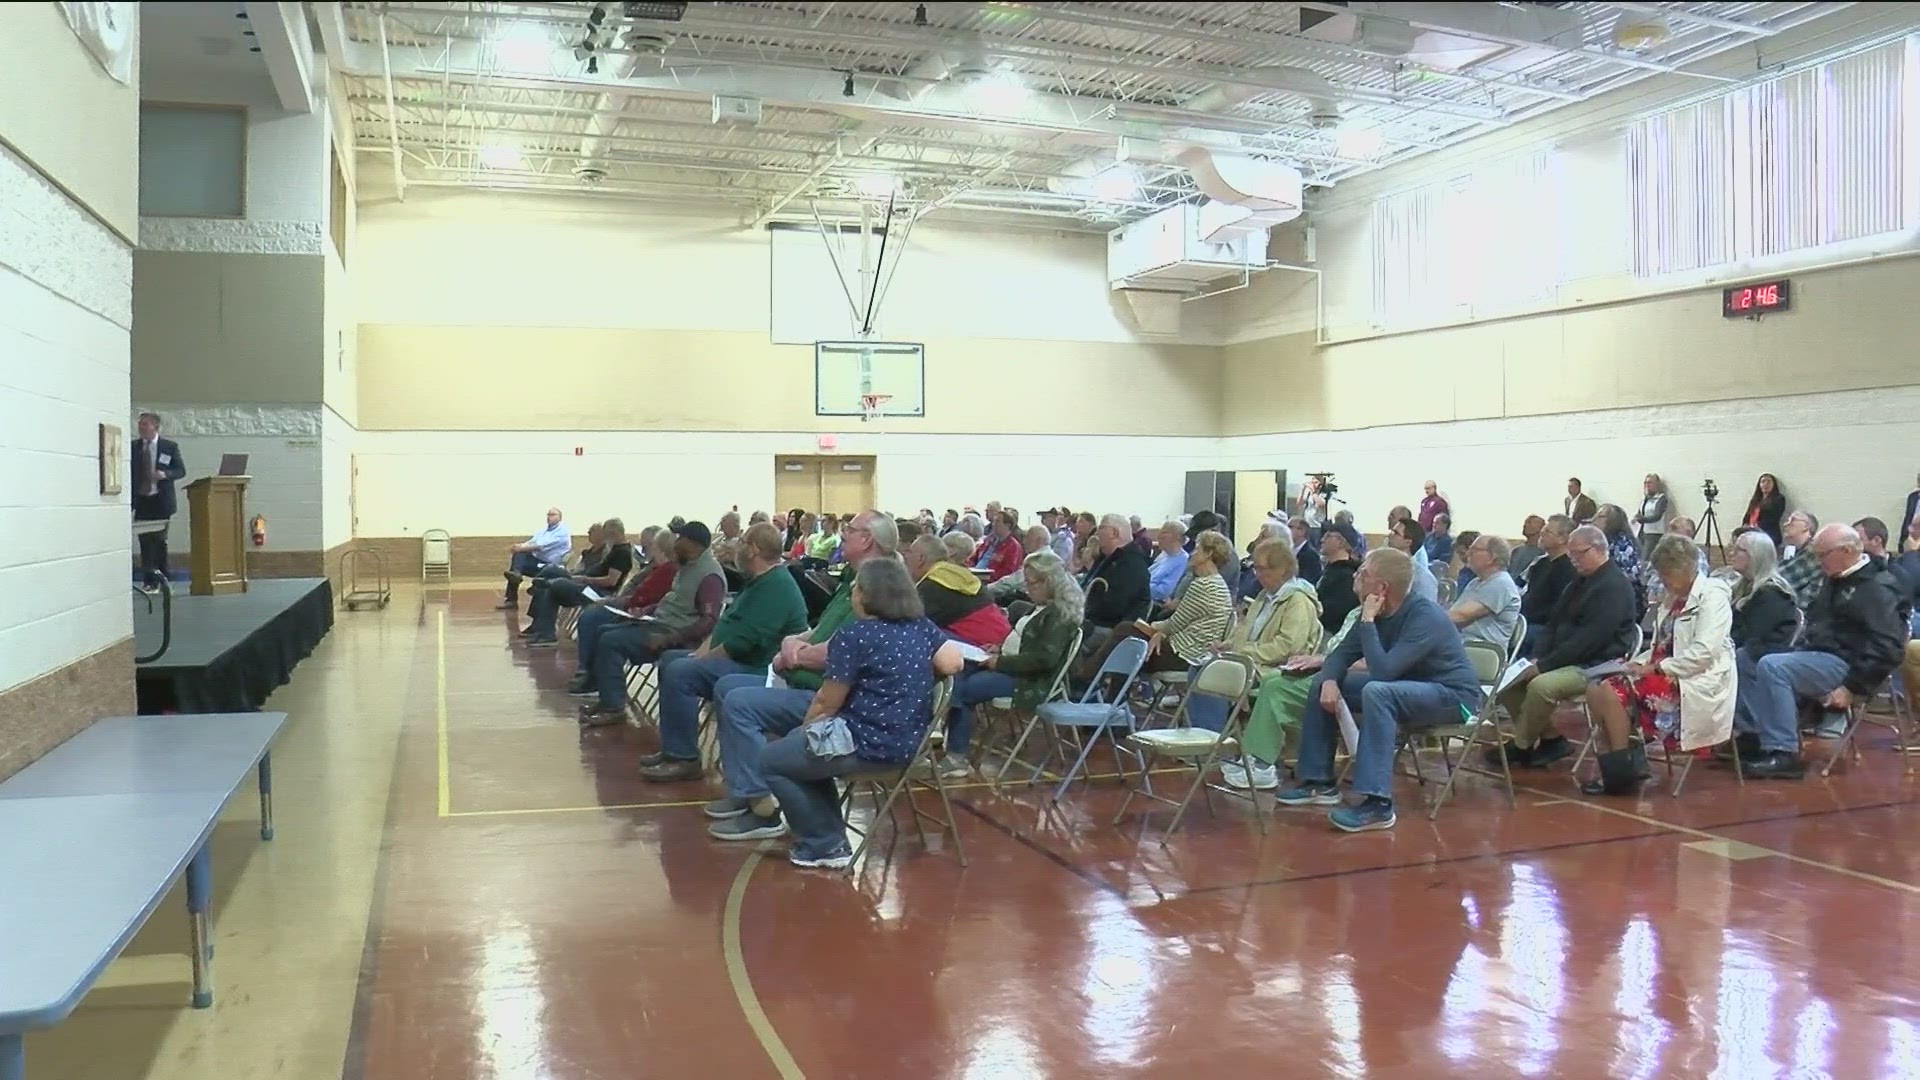 The Ohio Department of Transportation held an informational meeting Wednesday to address some concerns of west Toledo residents regarding an I-475 widening project.